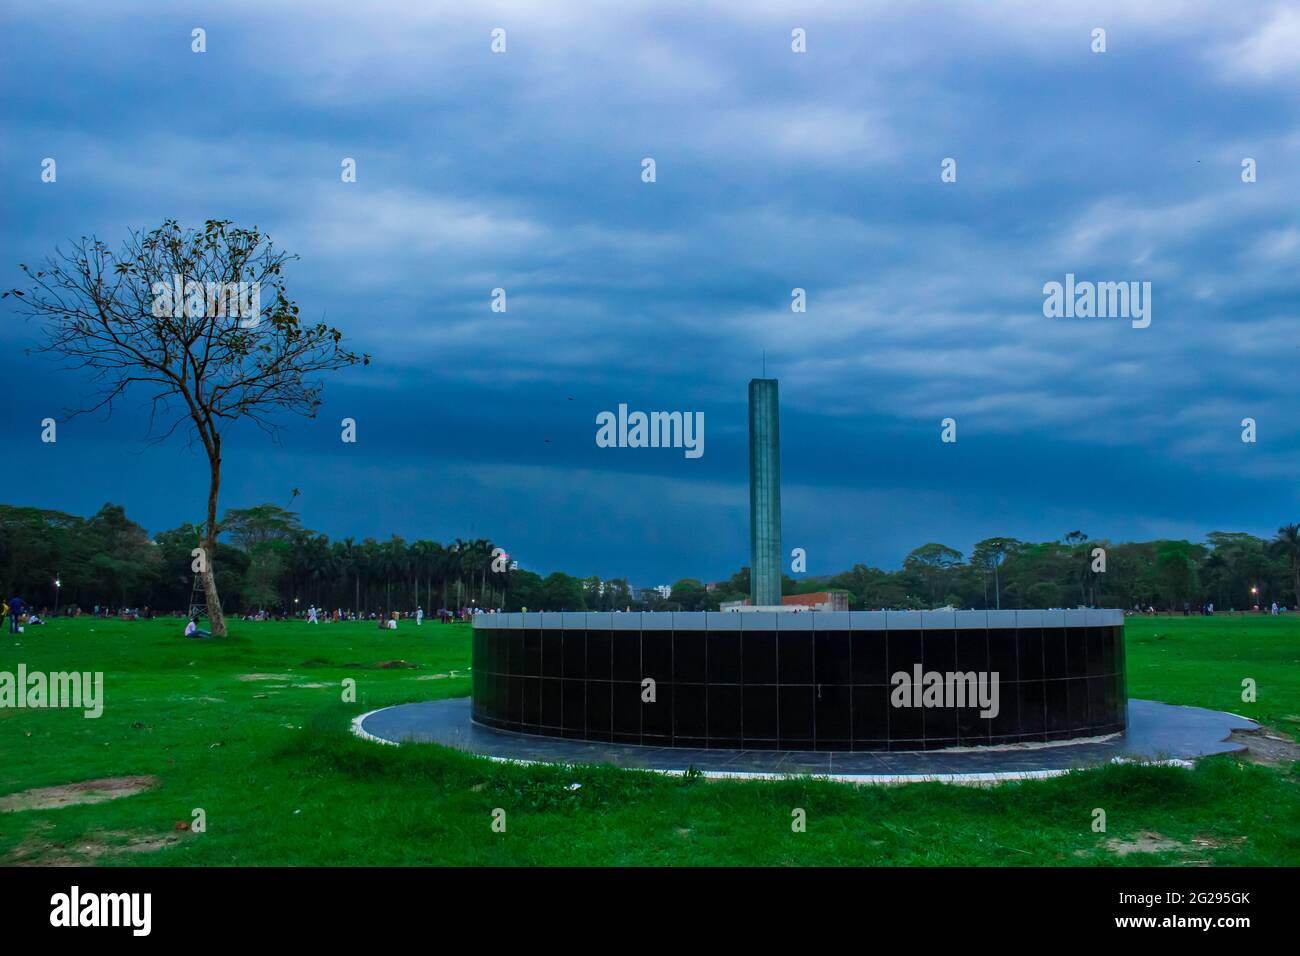 National museum tower under the cloudy sky. This image captured on April 9, 2019, from Dhaka, Bangladesh, South Asia Stock Photo